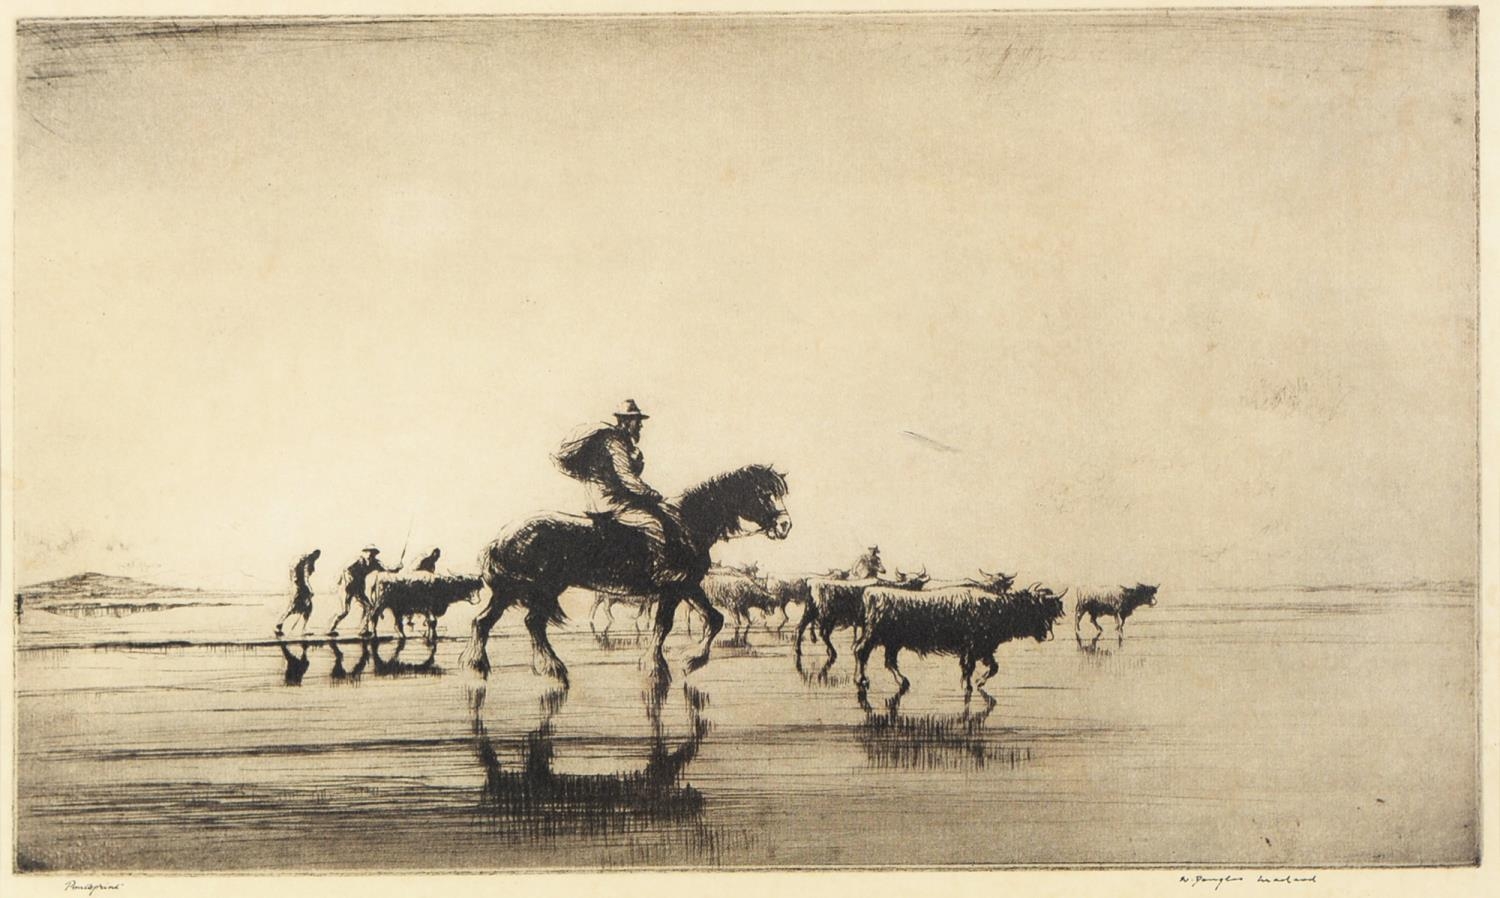 Sidney Tushingham (1884-1968) - Youths Crabbing on the Beach, signed in pencil, etching, 21.5 x